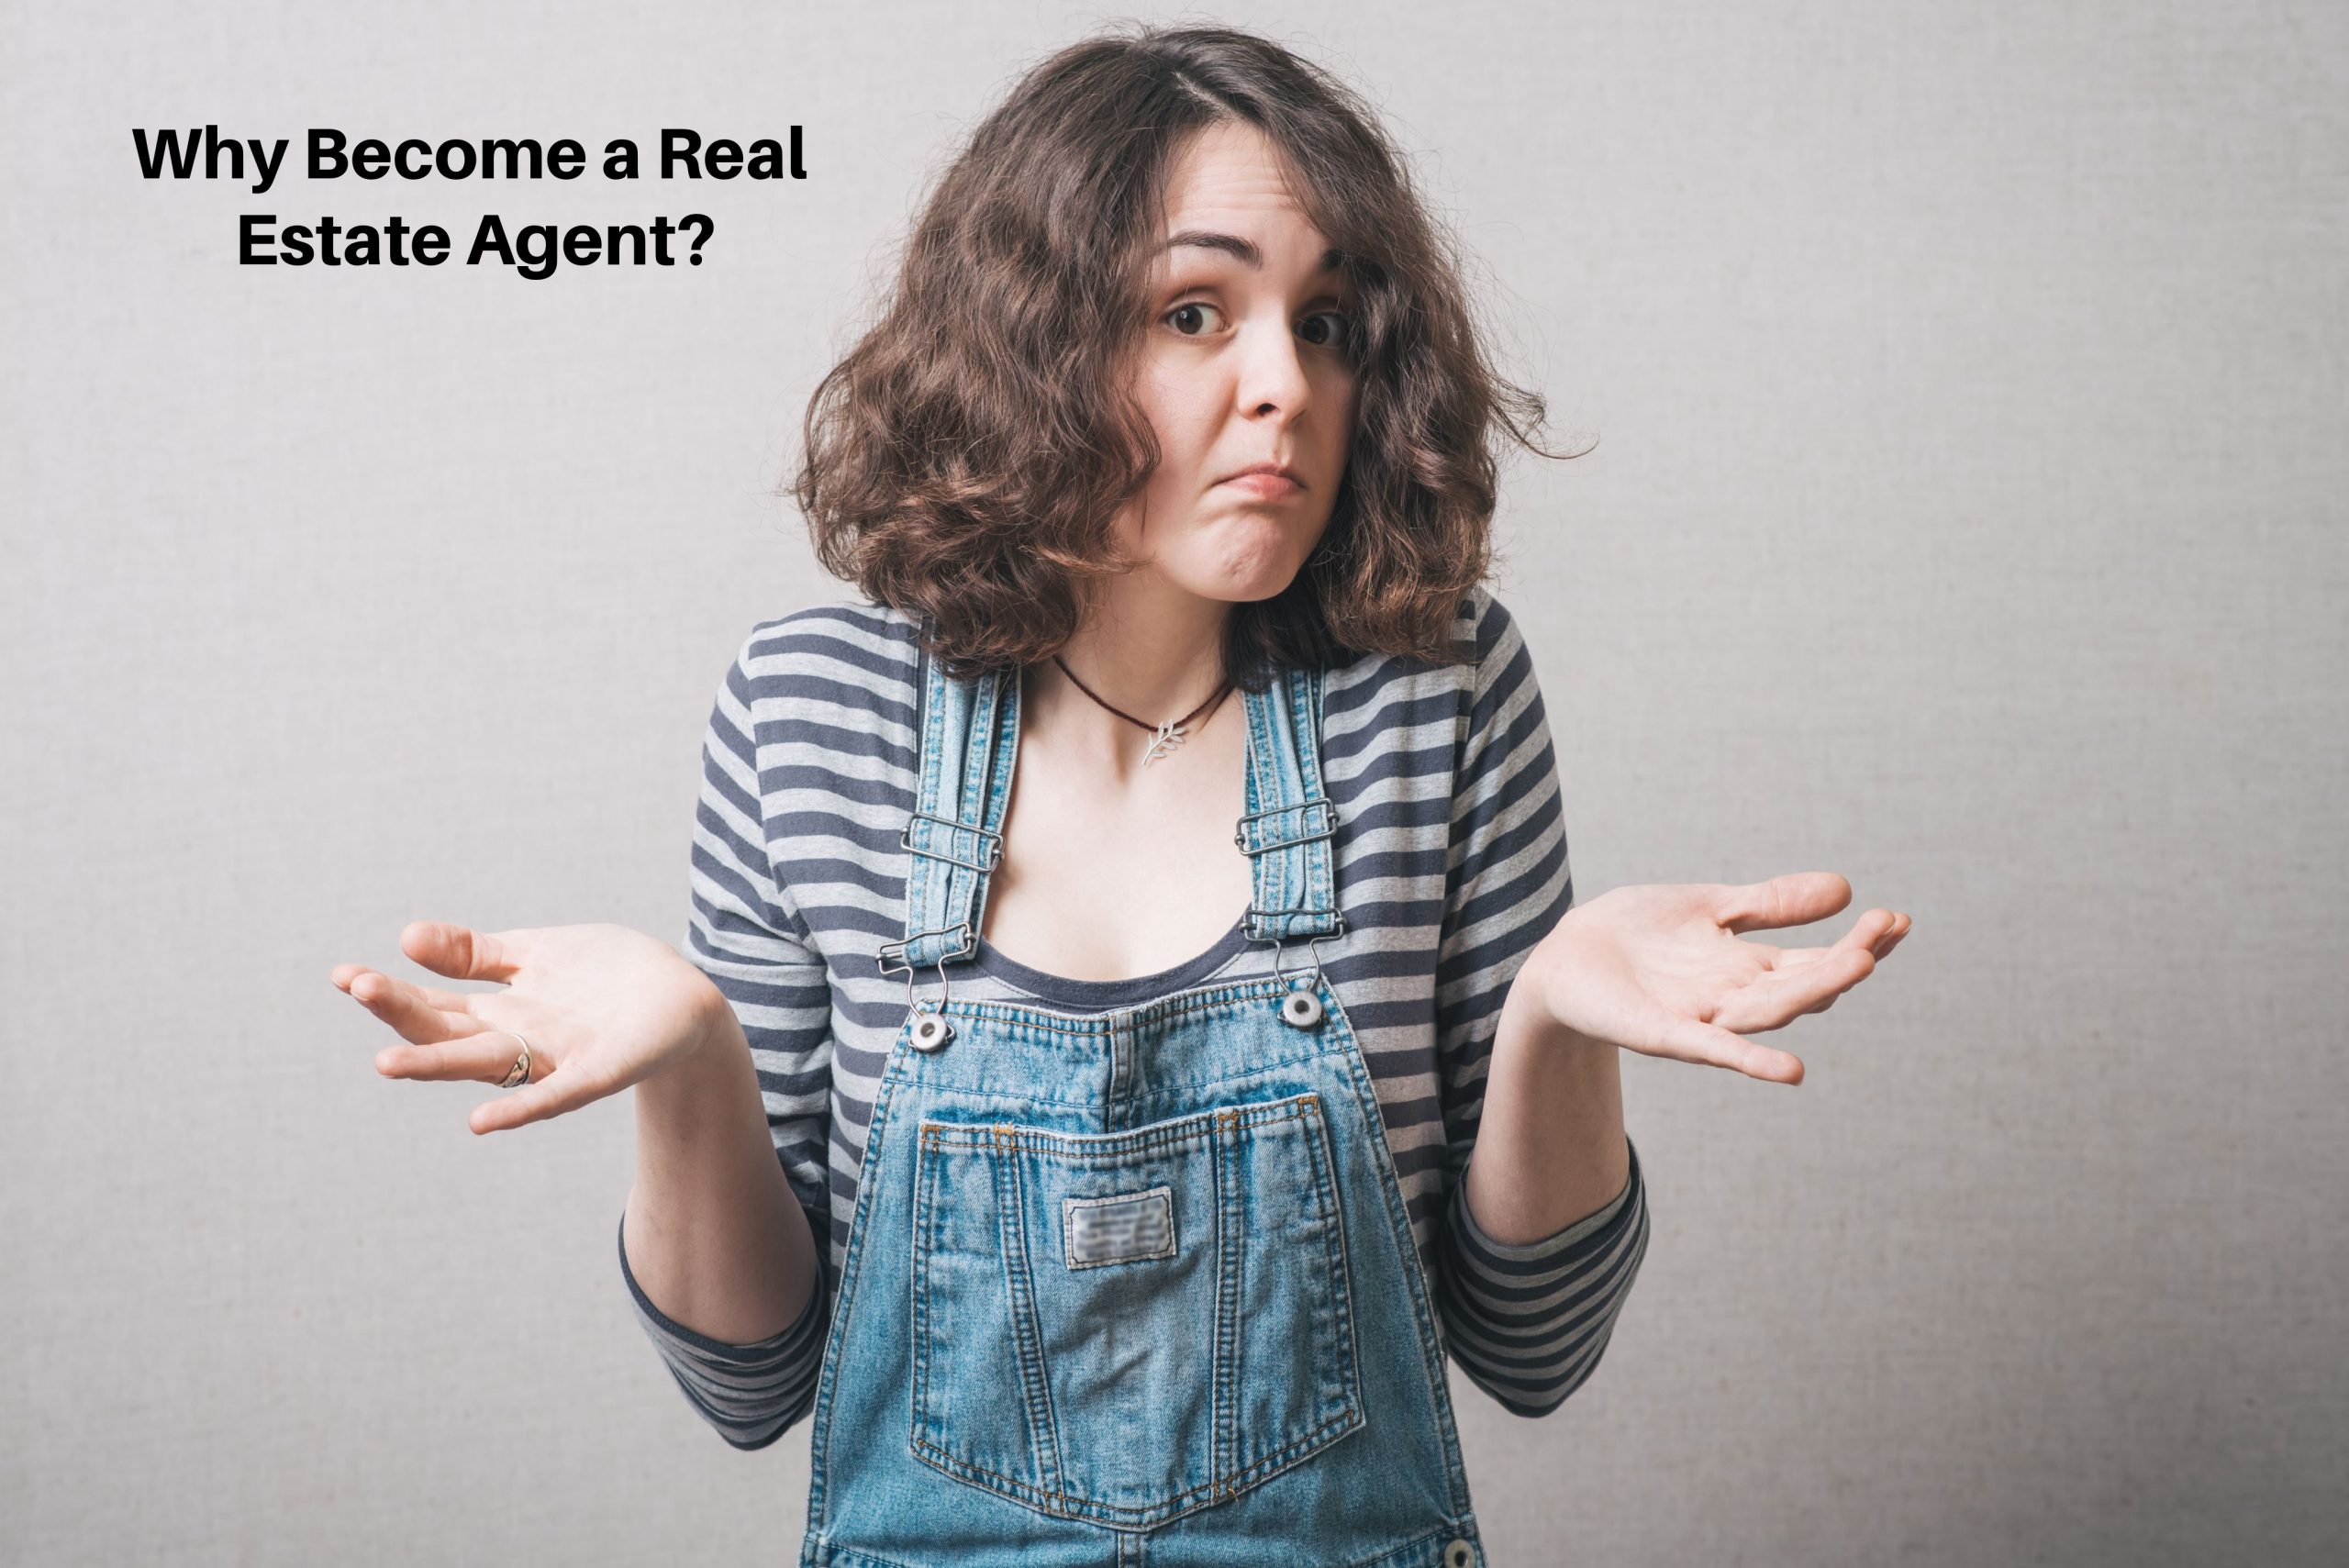 Become a Real Estate Agent. But Why?